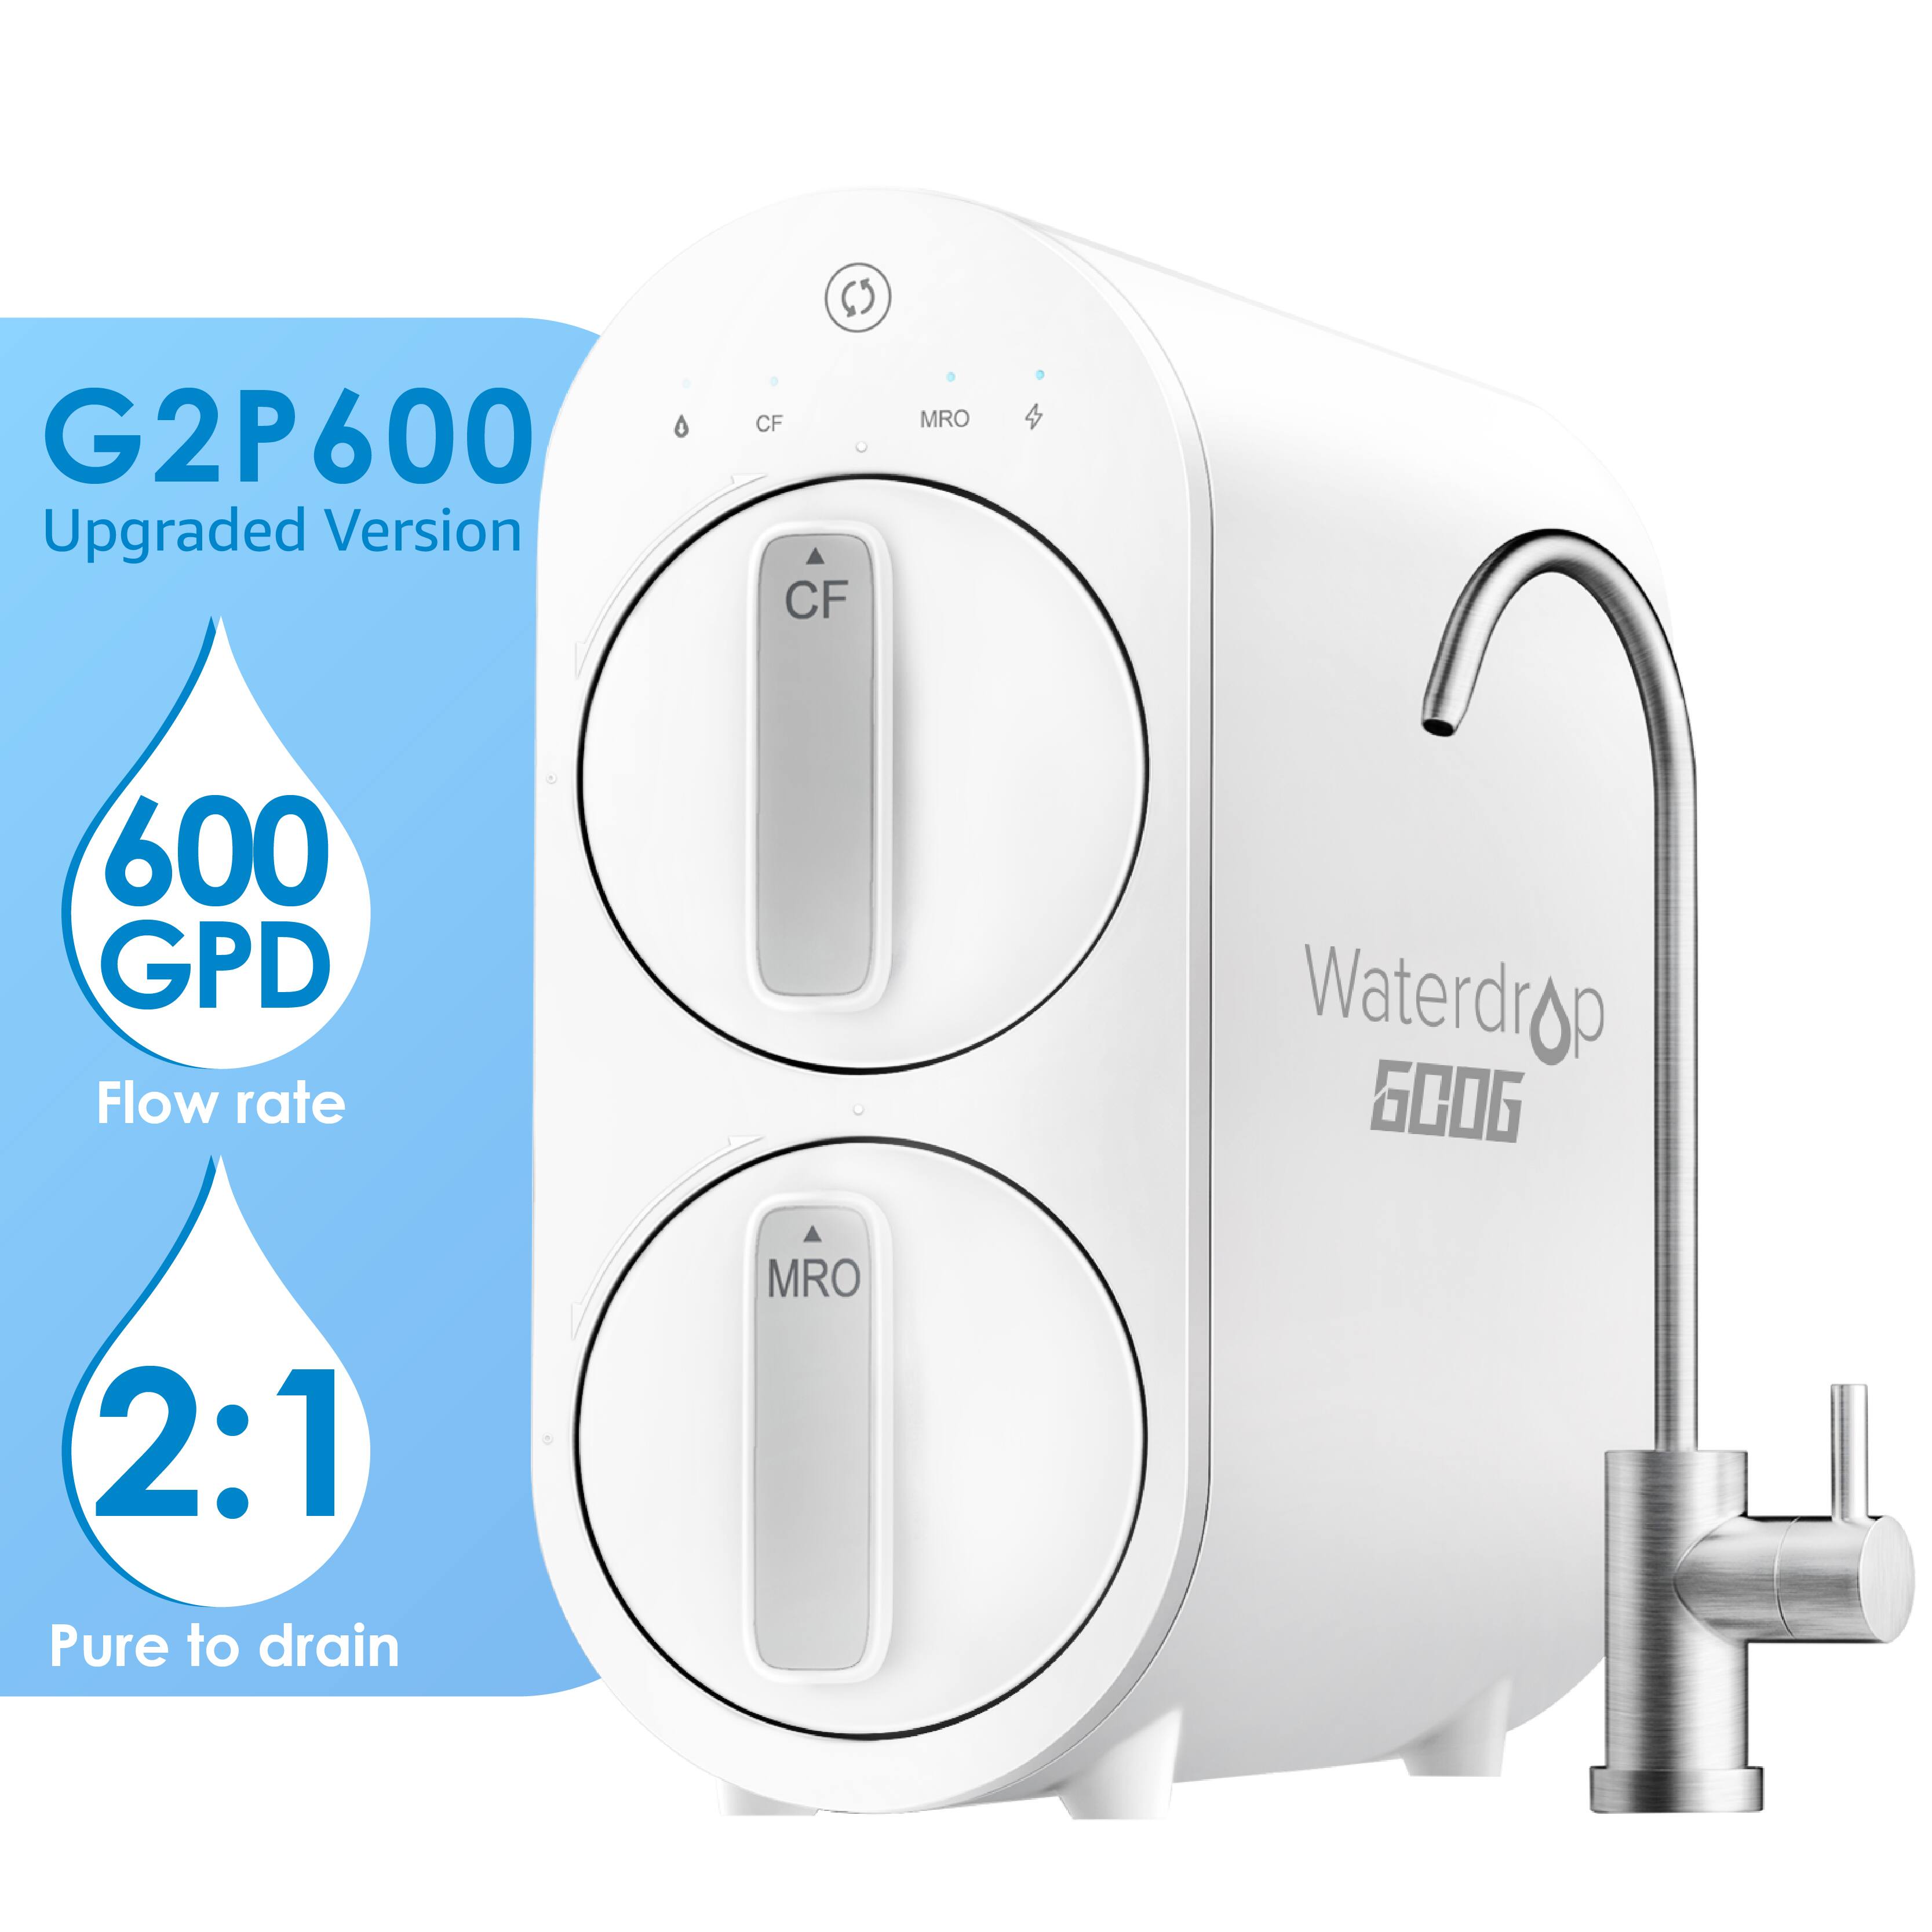 Waterdrop G2P600 Tankless Reverse Osmosis Water Filtration System, 600GPD for $287.99+FS for Amazon Prime